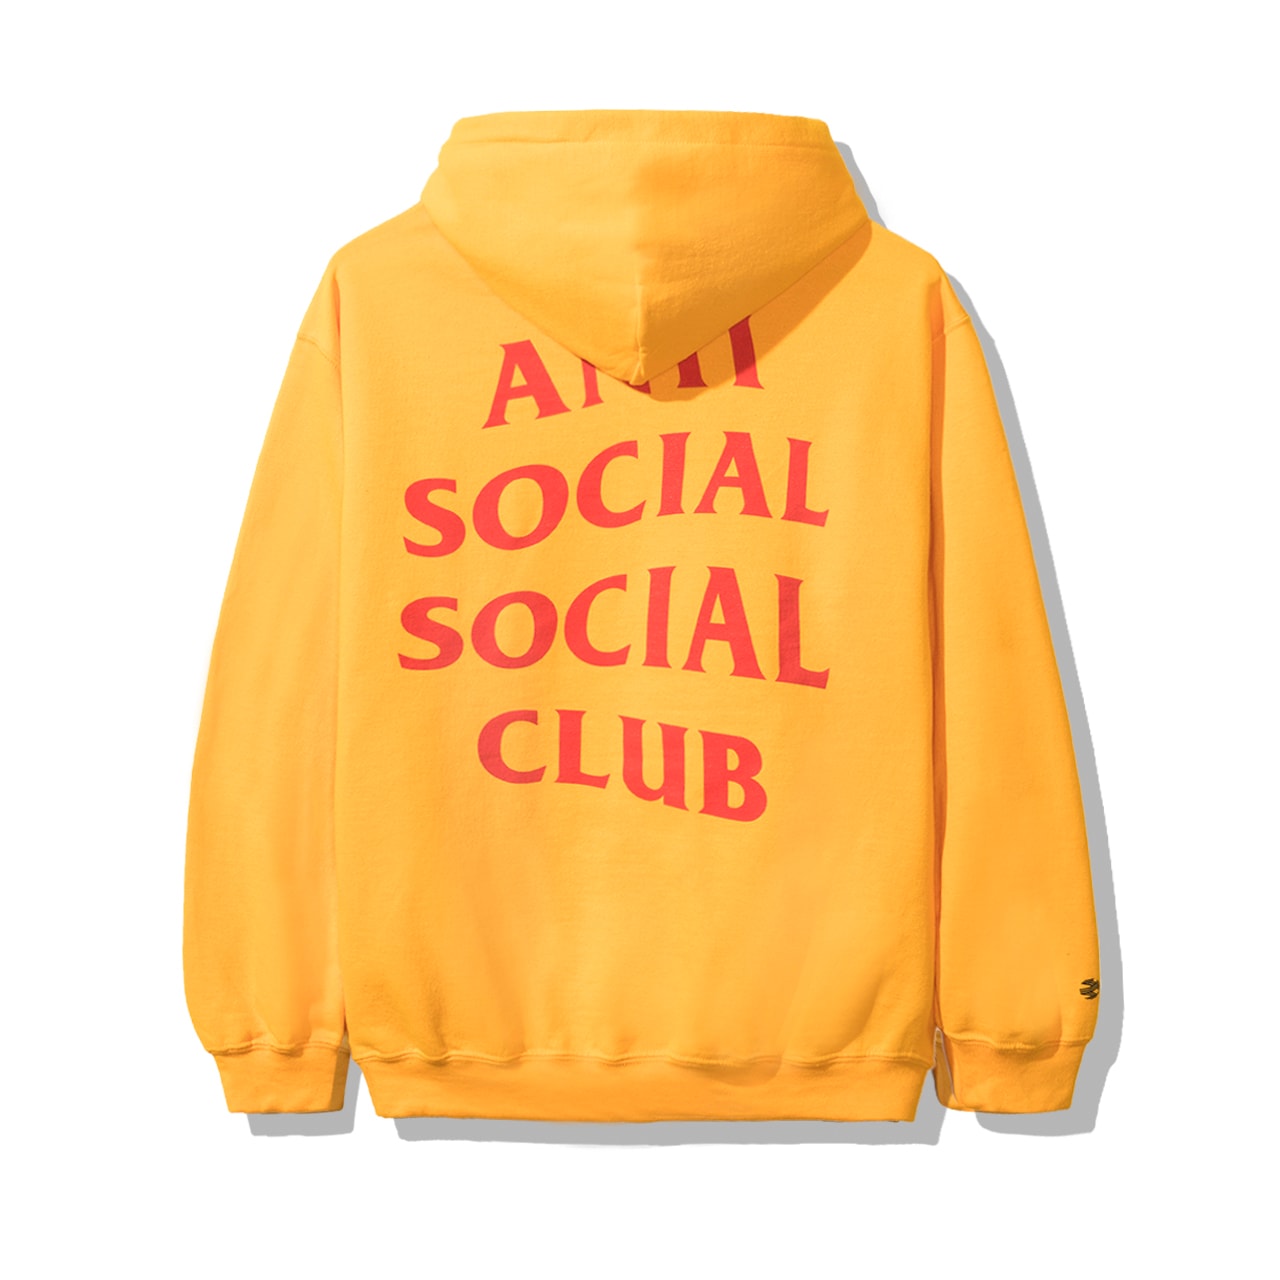 Anti Social Social Club DHL Clothing Collaboration capsule september 25 2019 release date info buy drop hoodie pillow cushion shipping yellow red logo